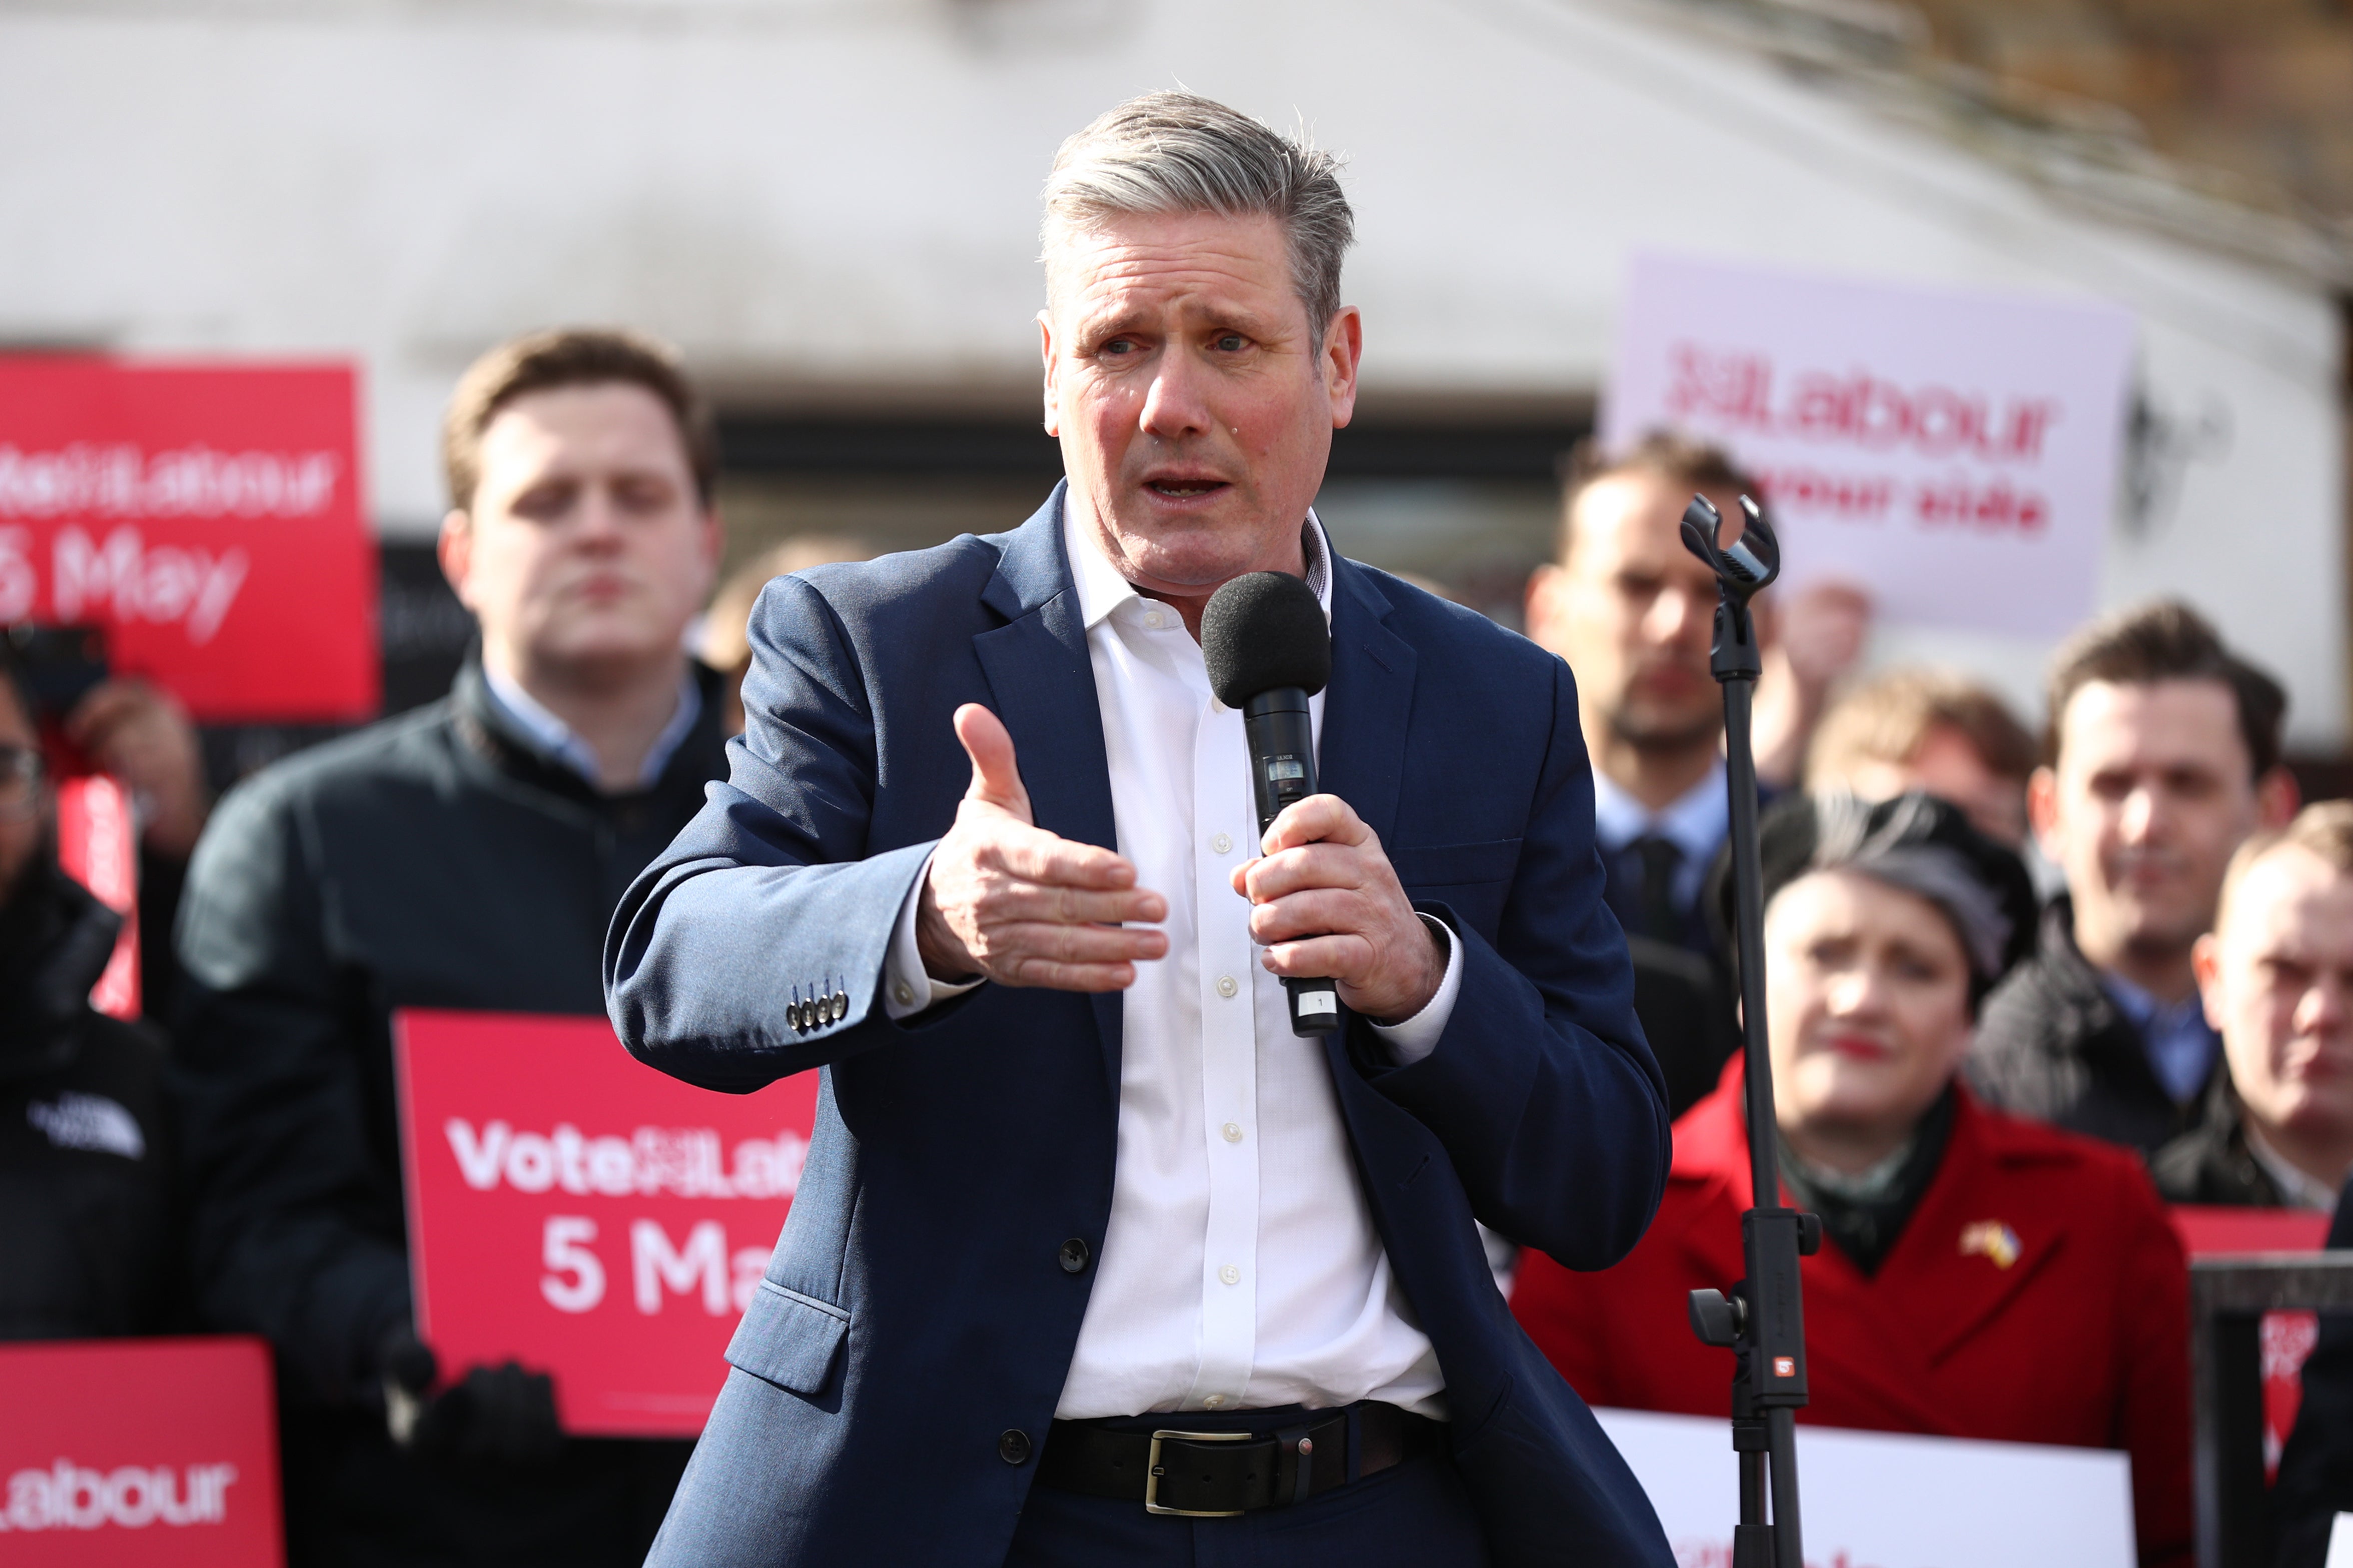 Keir Starmer believes the party has failed to fight back hard enough against the Tory slander